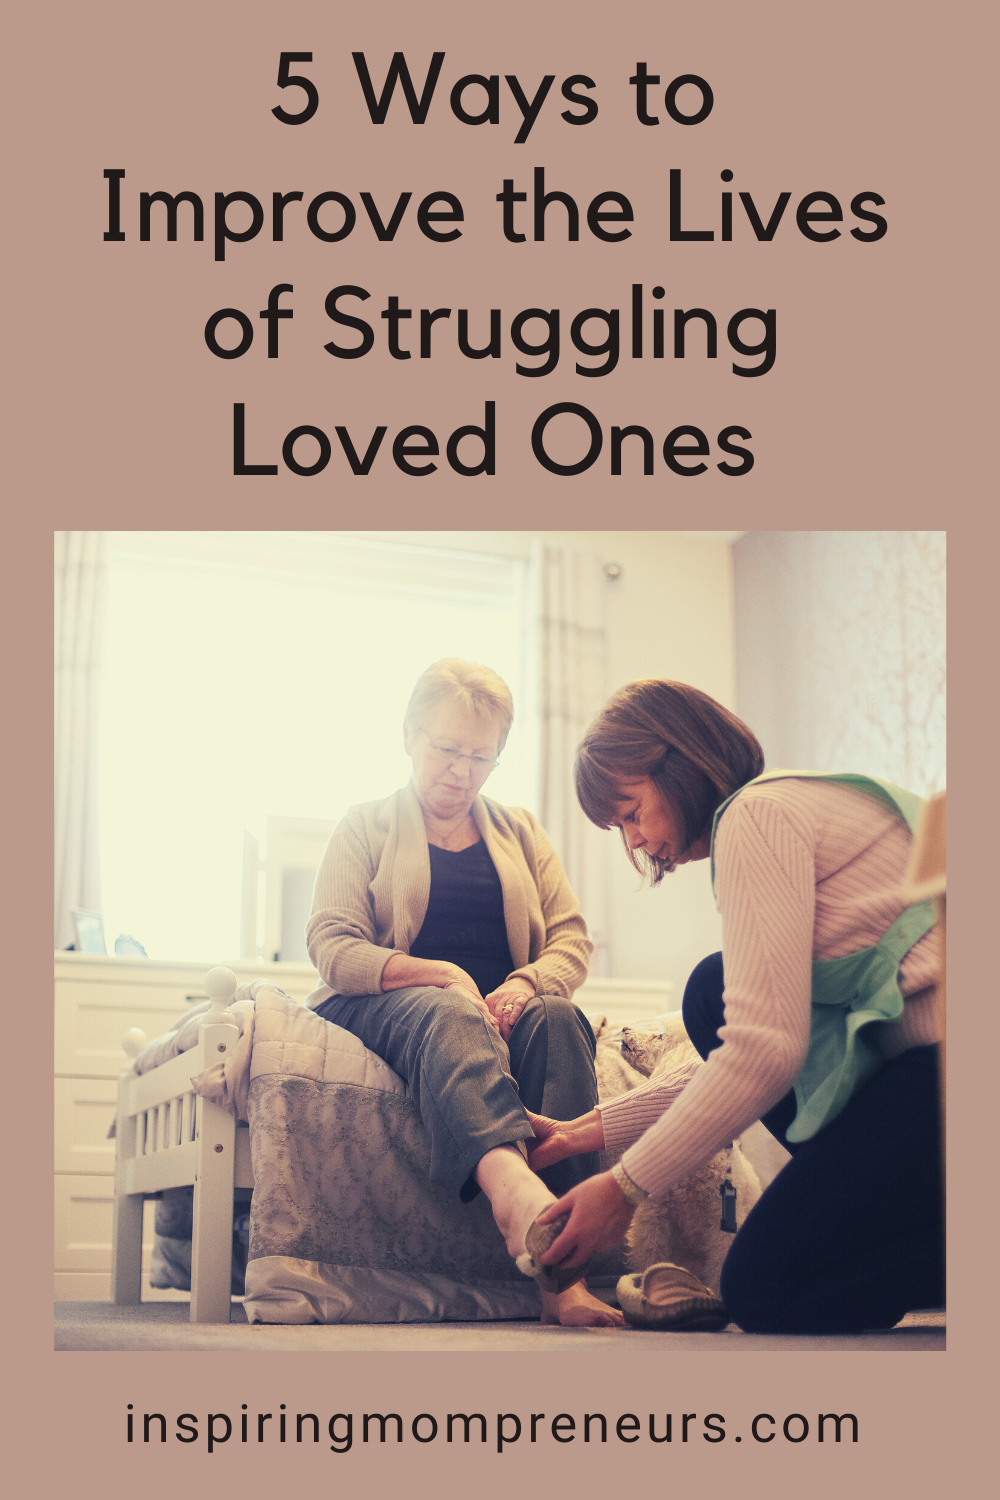 When people in your life are going through something difficult, it can take a huge toll on everyone. Here are 5 ways to improve the lives of struggling ones.